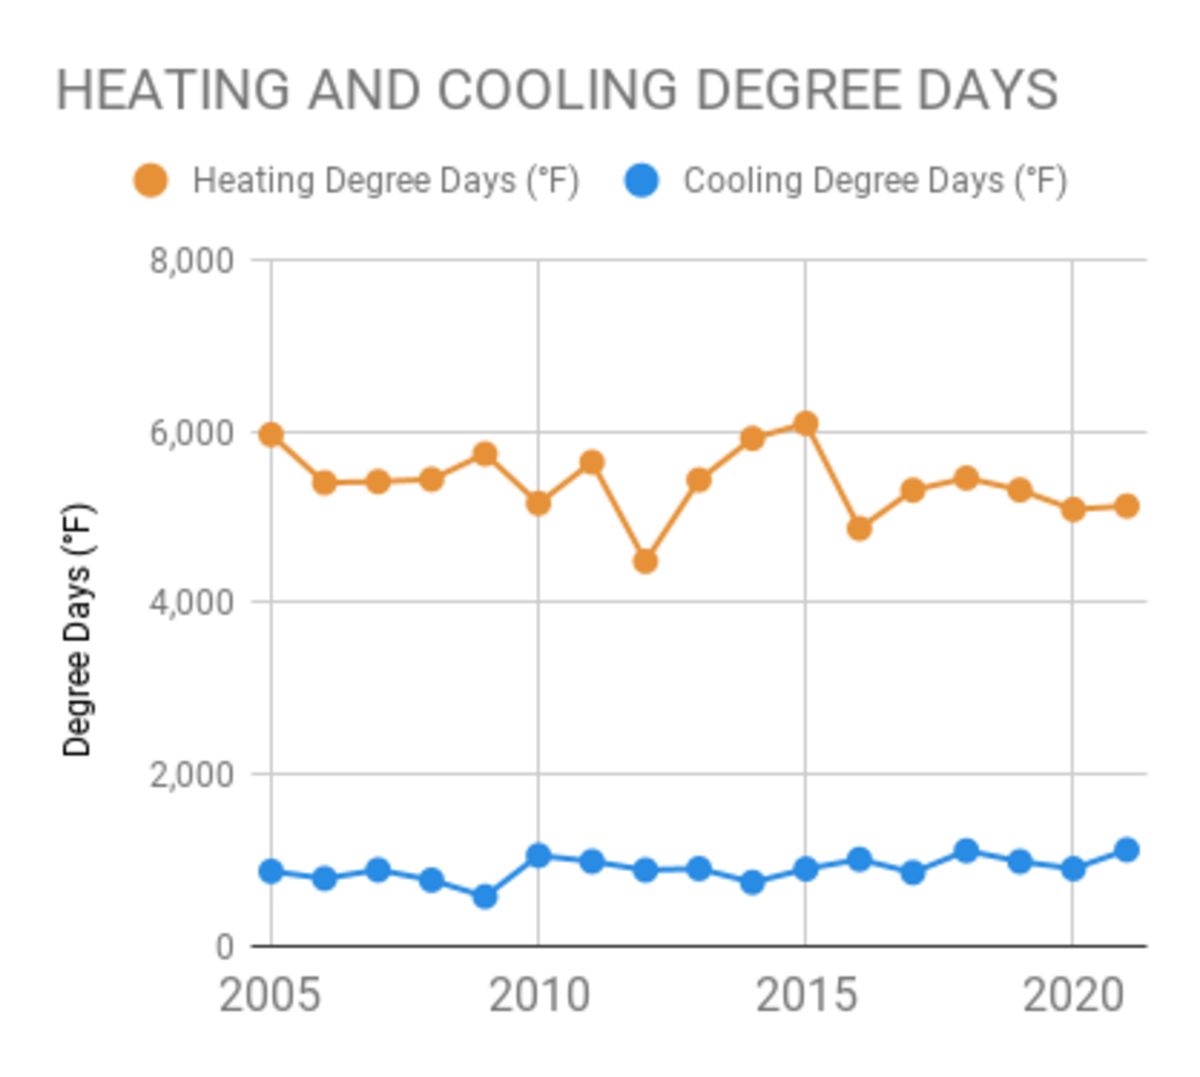 Chart showing the heating and cooling degree days for each year from 2005 to 2021